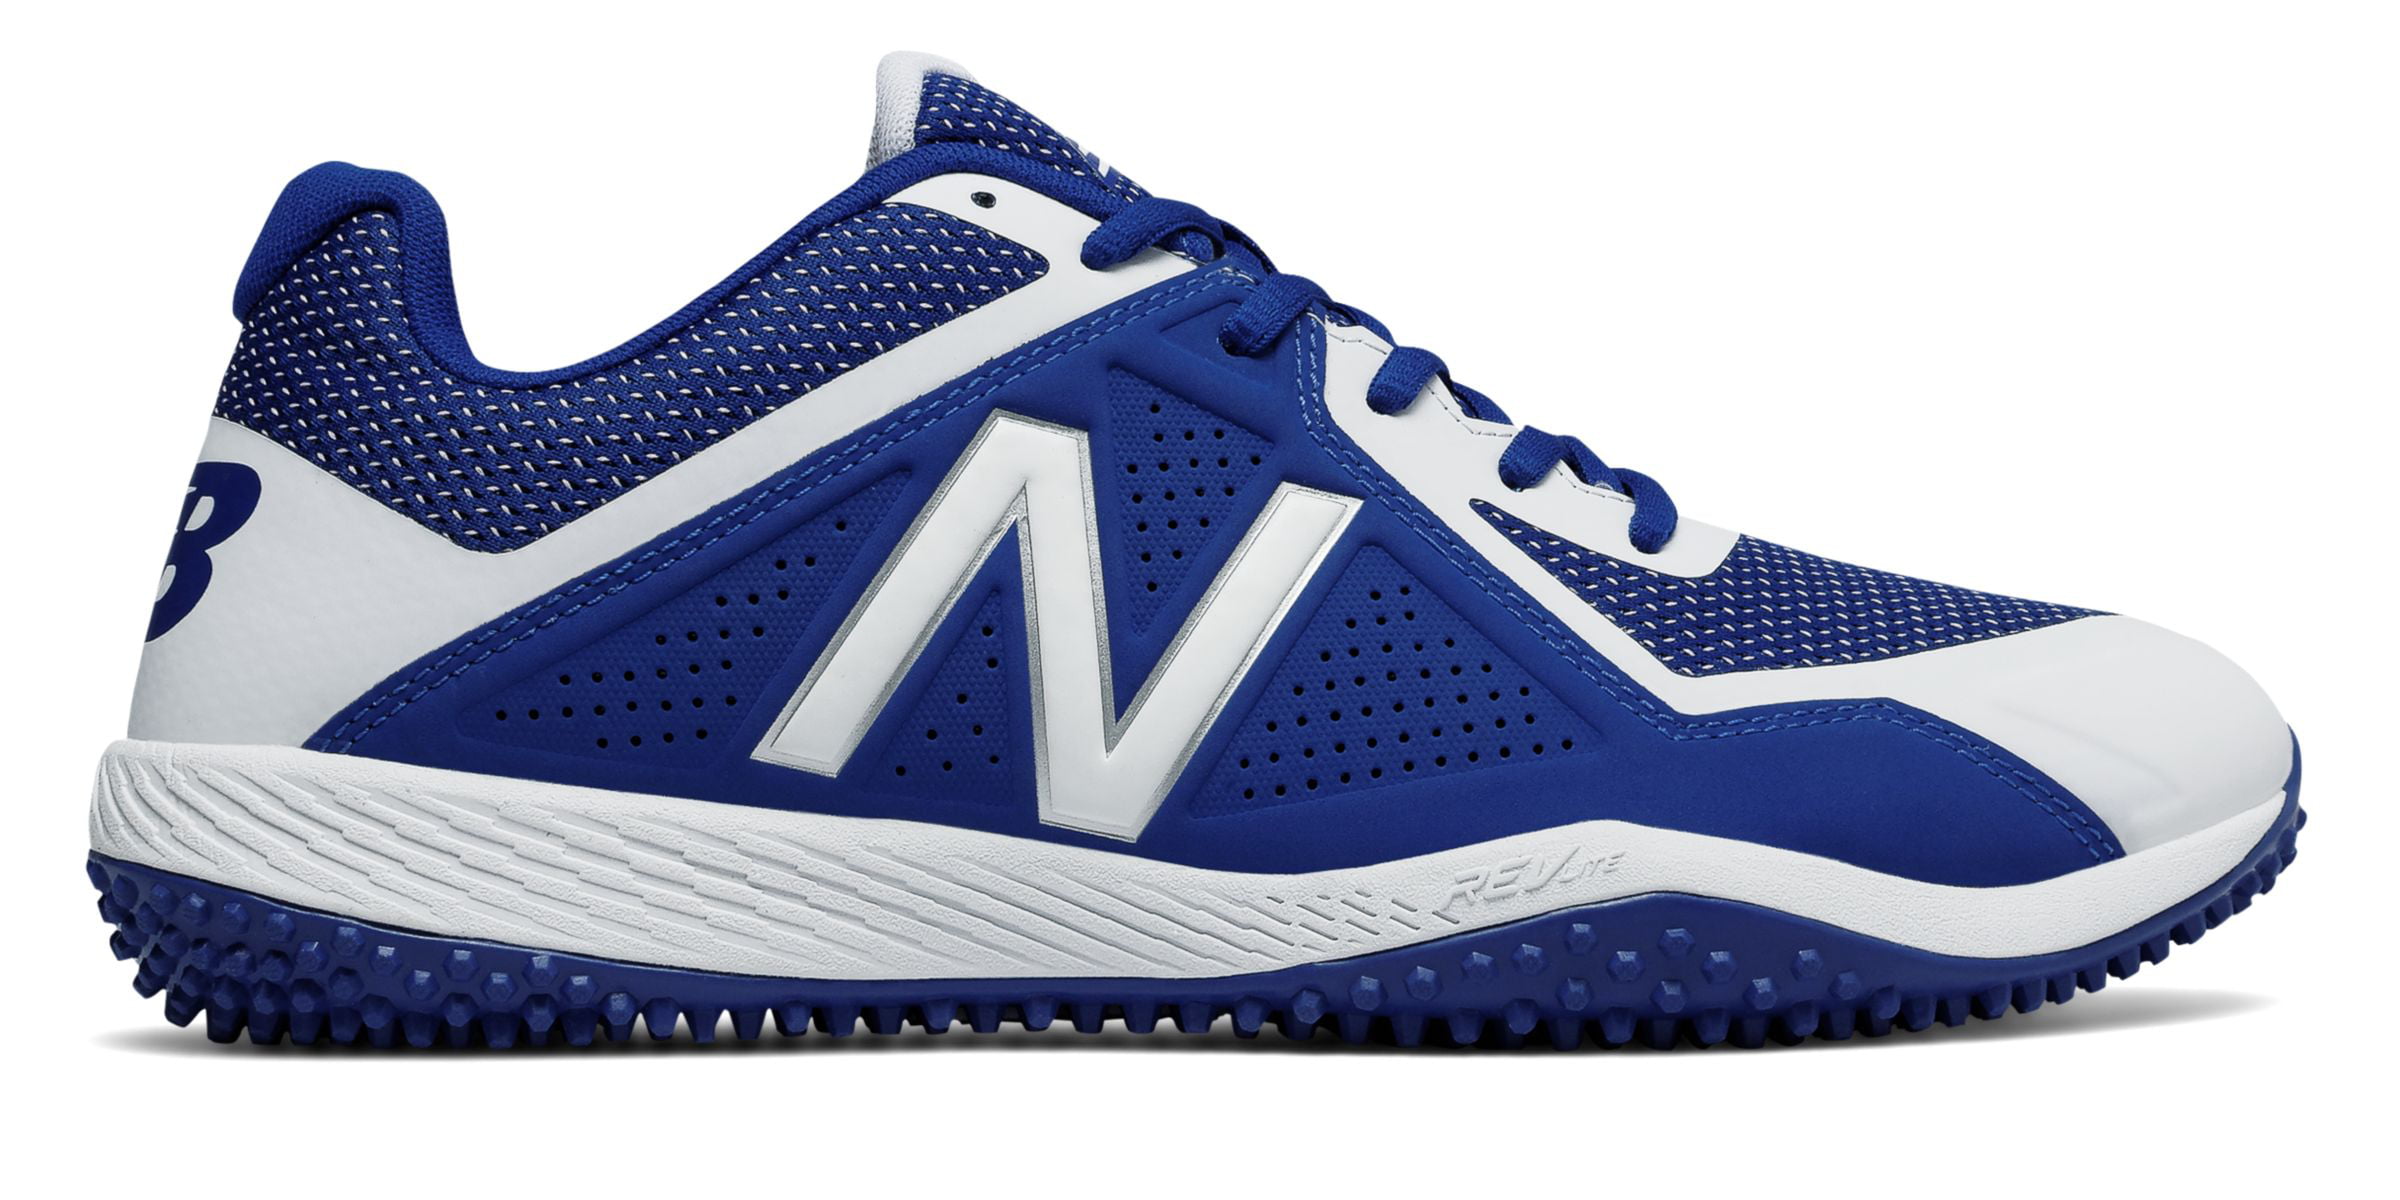 New Balance Low-Cut 4040v4 Turf Baseball Cleat Mens Shoes Blue with ...